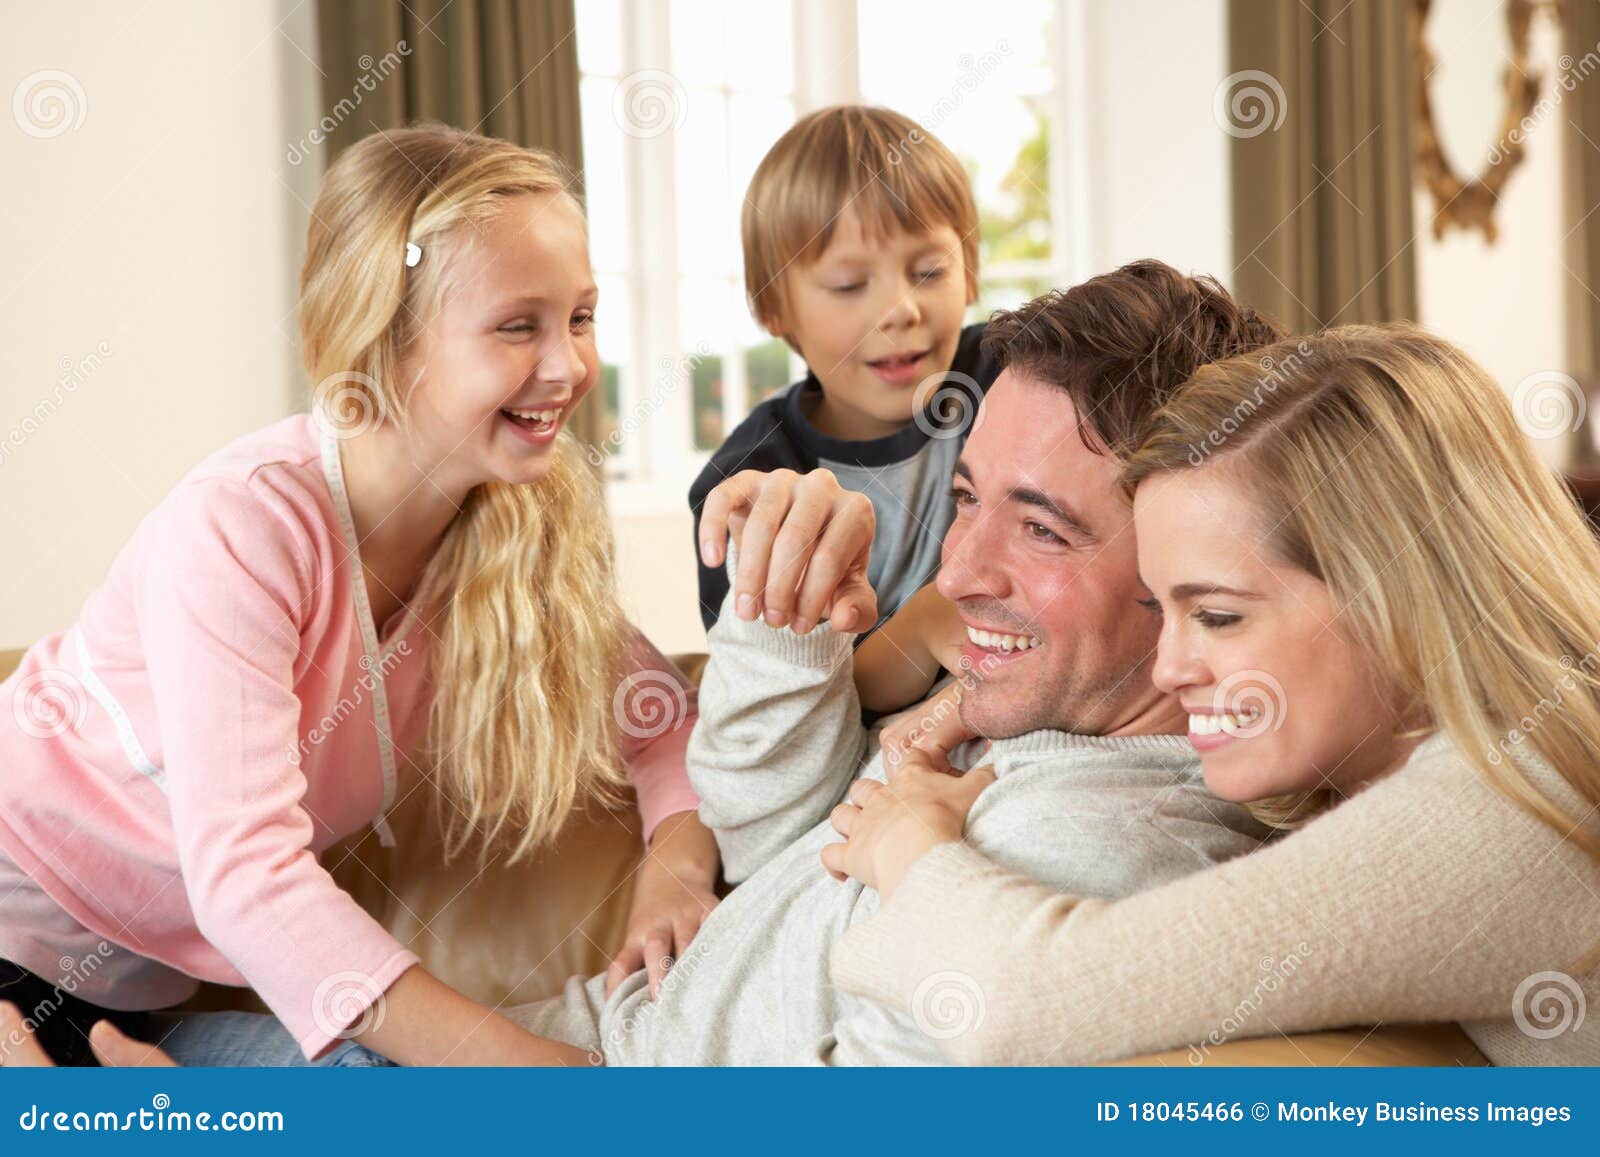 Happy Young Family Playing Together On Sofa Royalty Free Stock Image